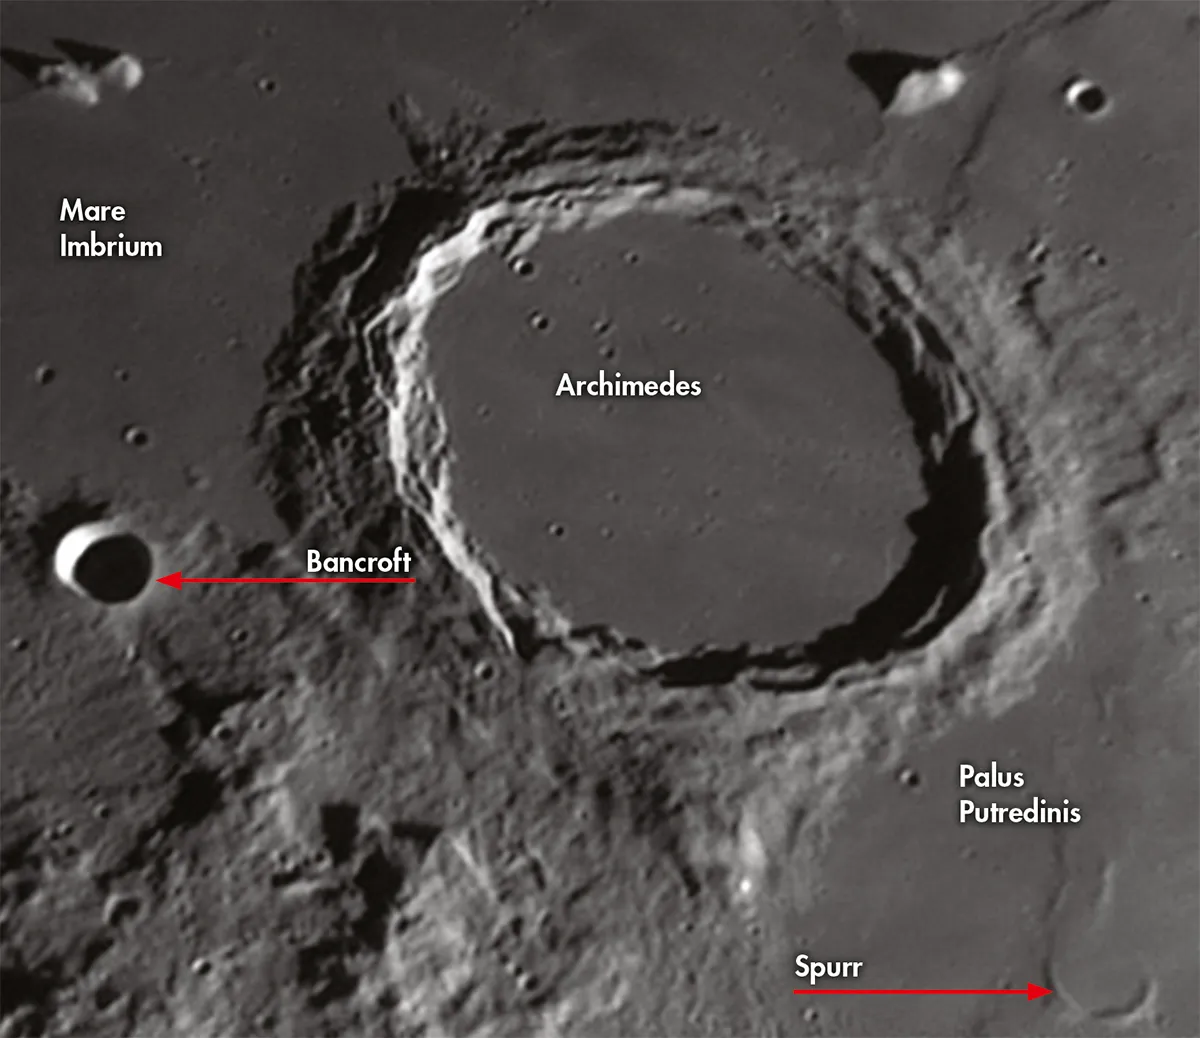 An annotated image of the region around Archimedes crater